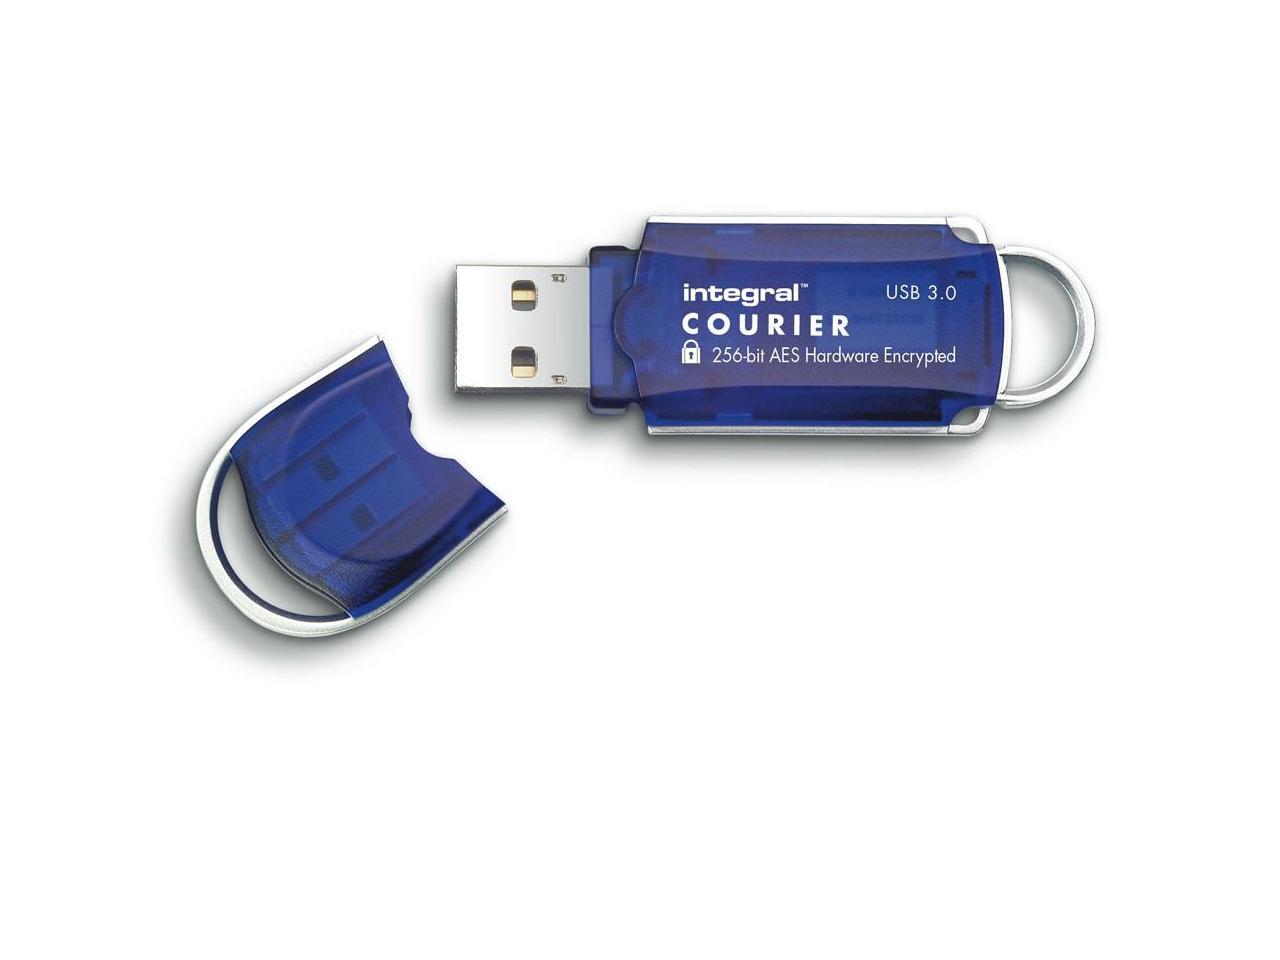 integral 16gb courier fips 197 encrypted usb 3.0